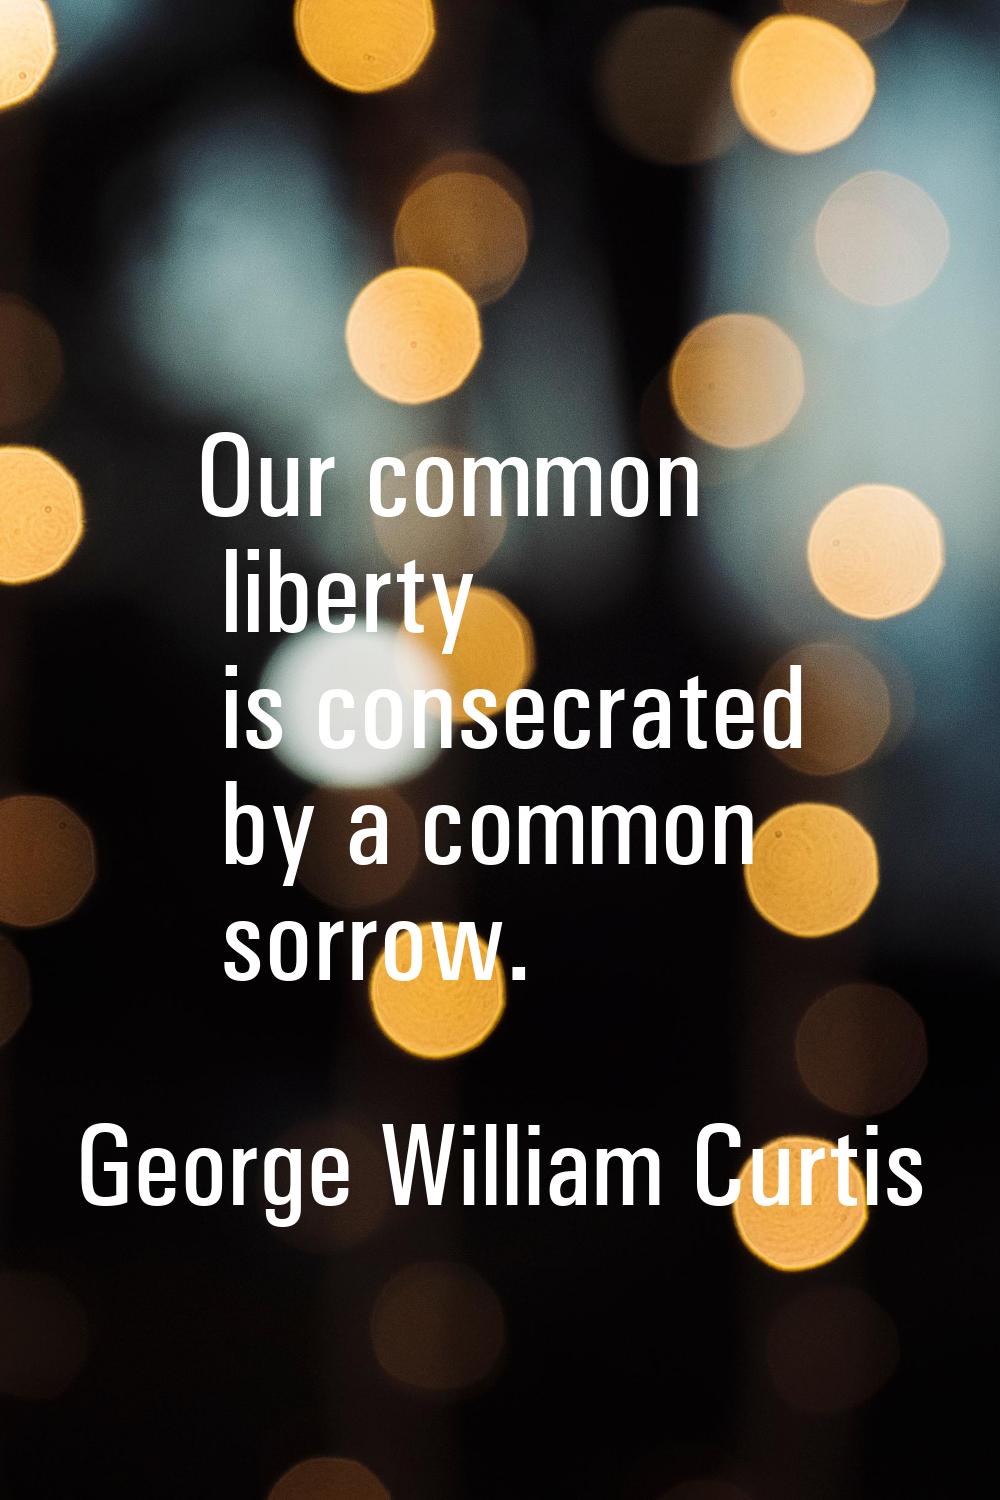 Our common liberty is consecrated by a common sorrow.